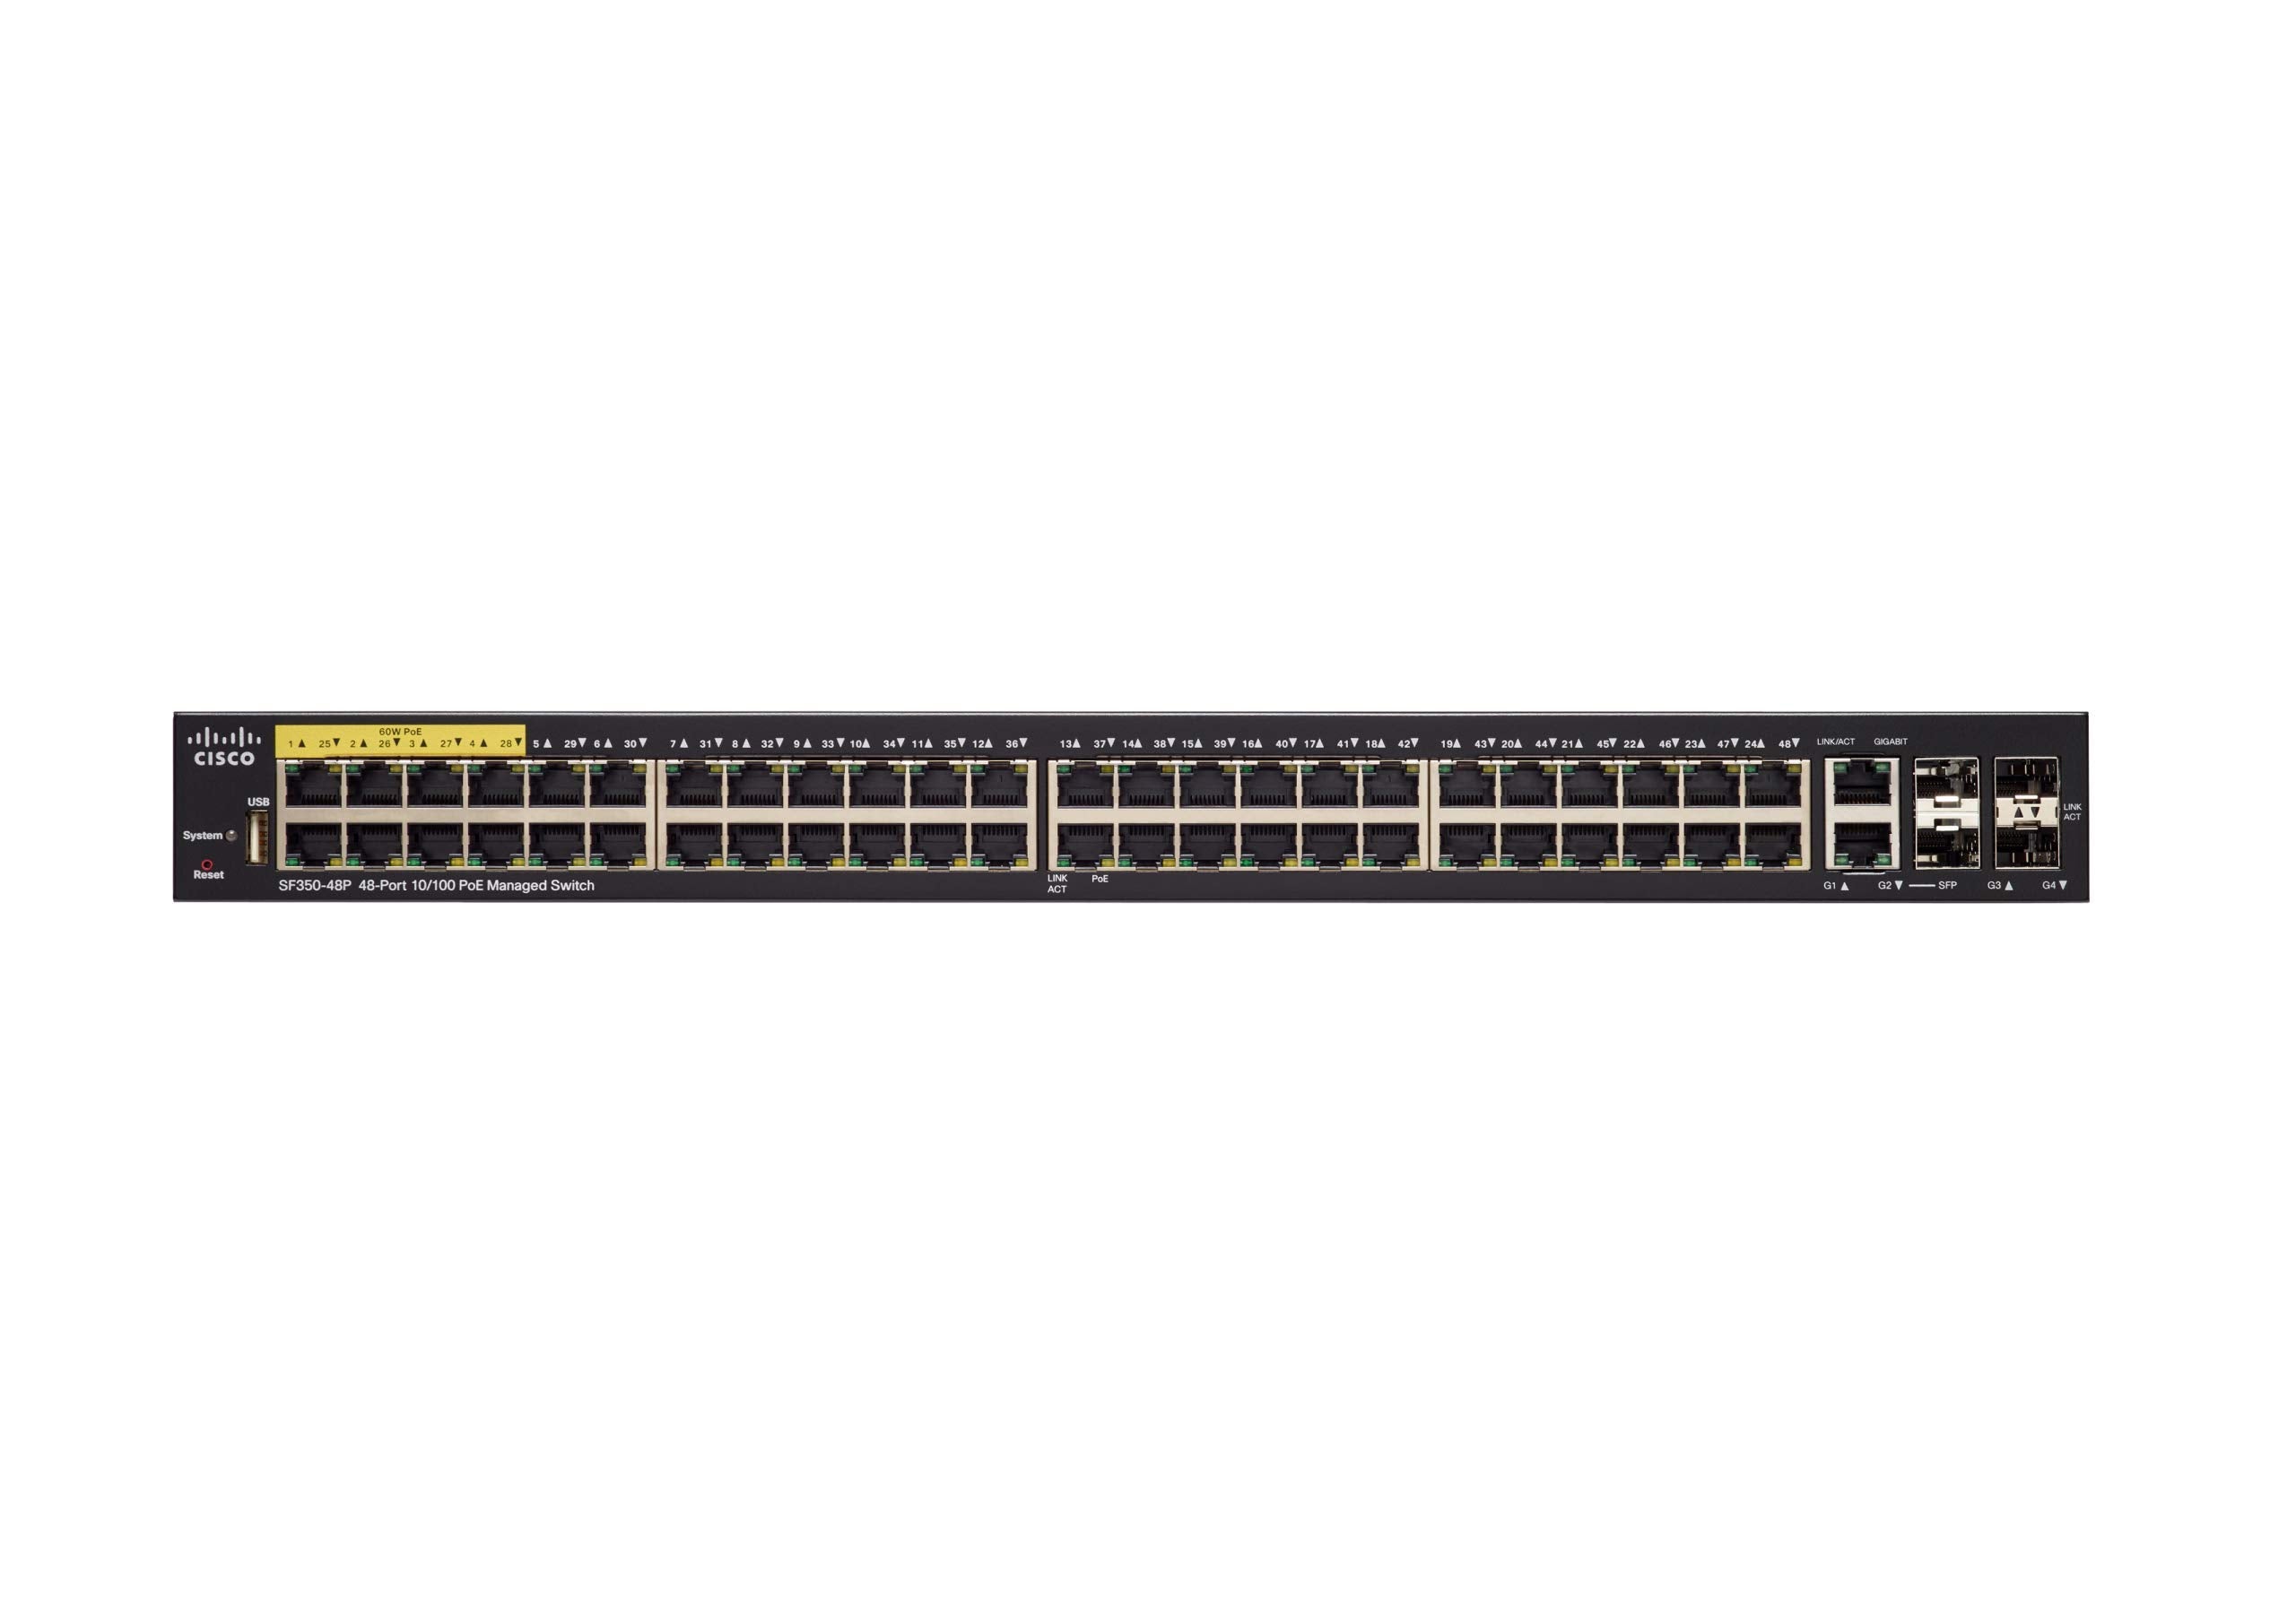 Cisco SF350-48P Managed Switch | 48 10/100 Ports | 382W PoE | 4 Gigabit Ethernet (GbE) Combo SFP | Limited Lifetime Protection (SF350-48P-K9-UK)